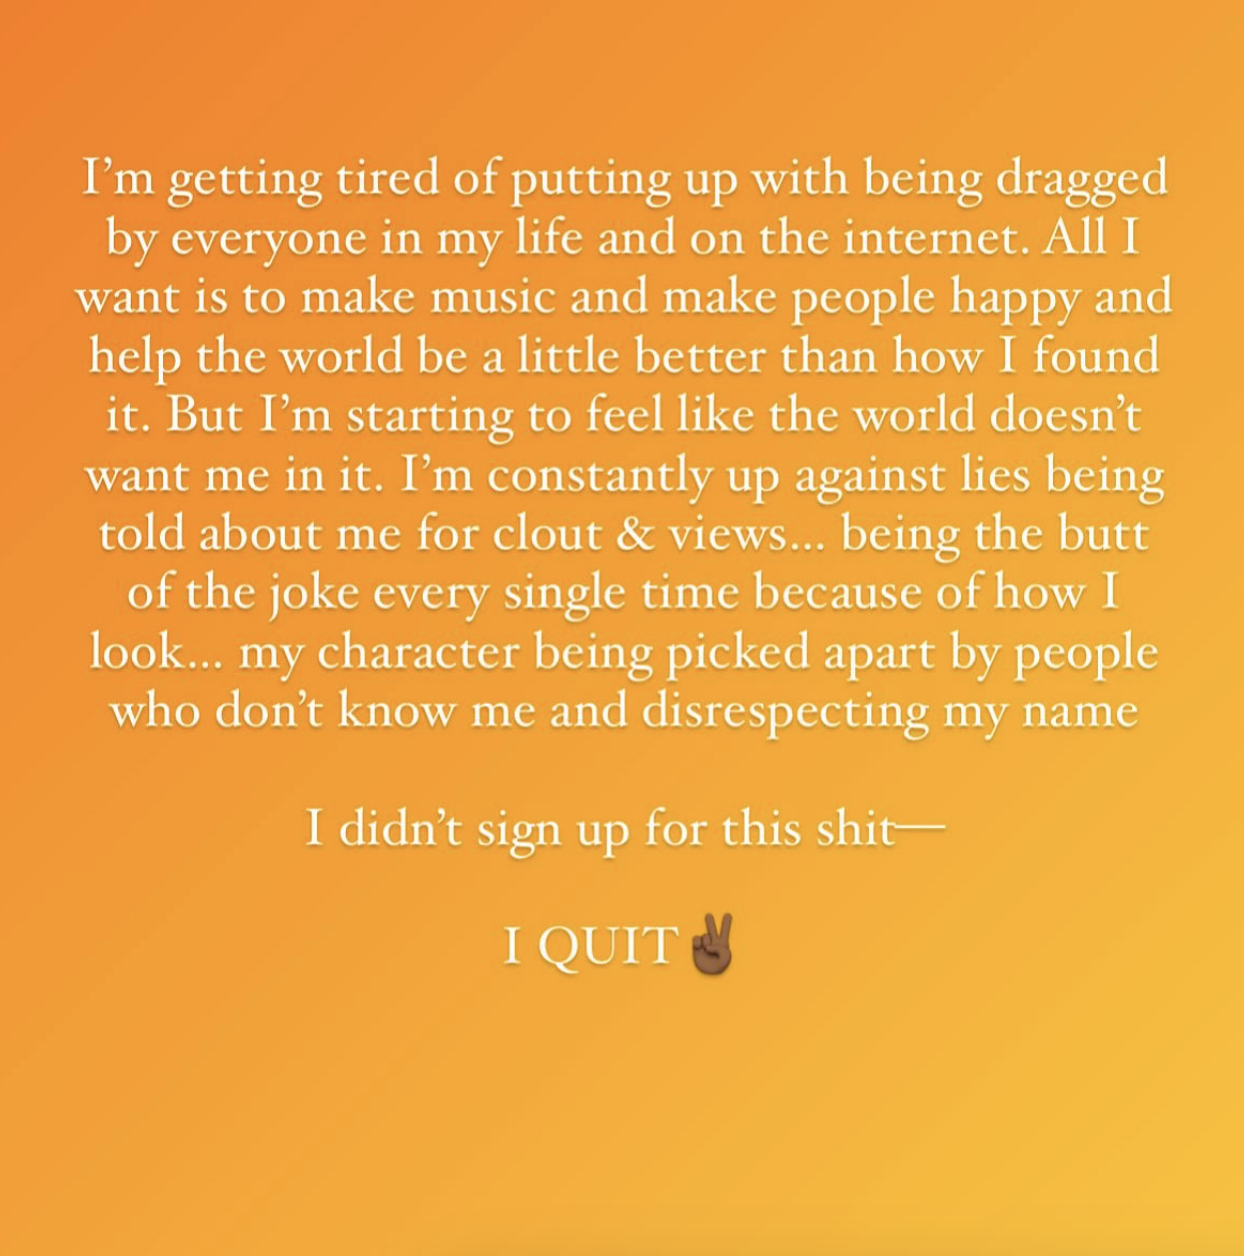 Text on a peach background expresses frustration with internet fame and ends with the declaration &quot;I QUIT&quot;